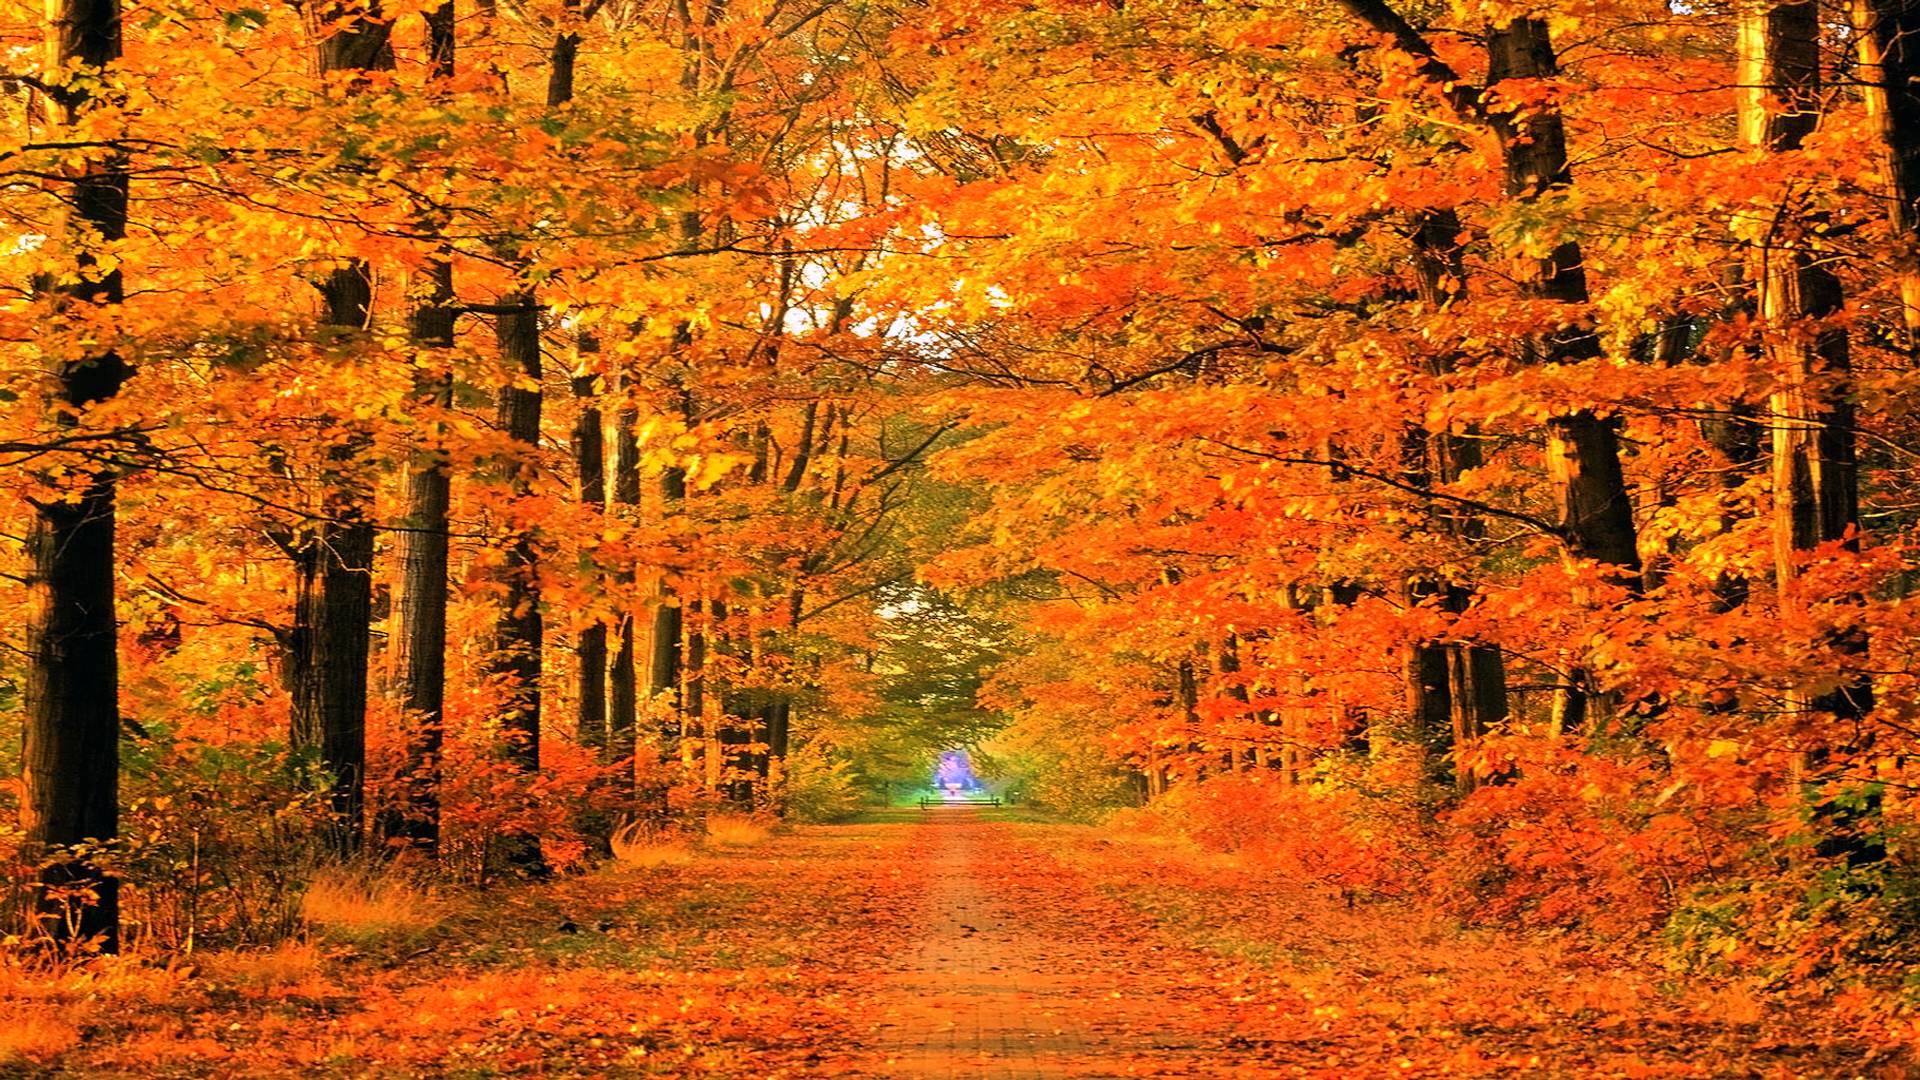 Fall Backgrounds For Computer Wallpaper Cave